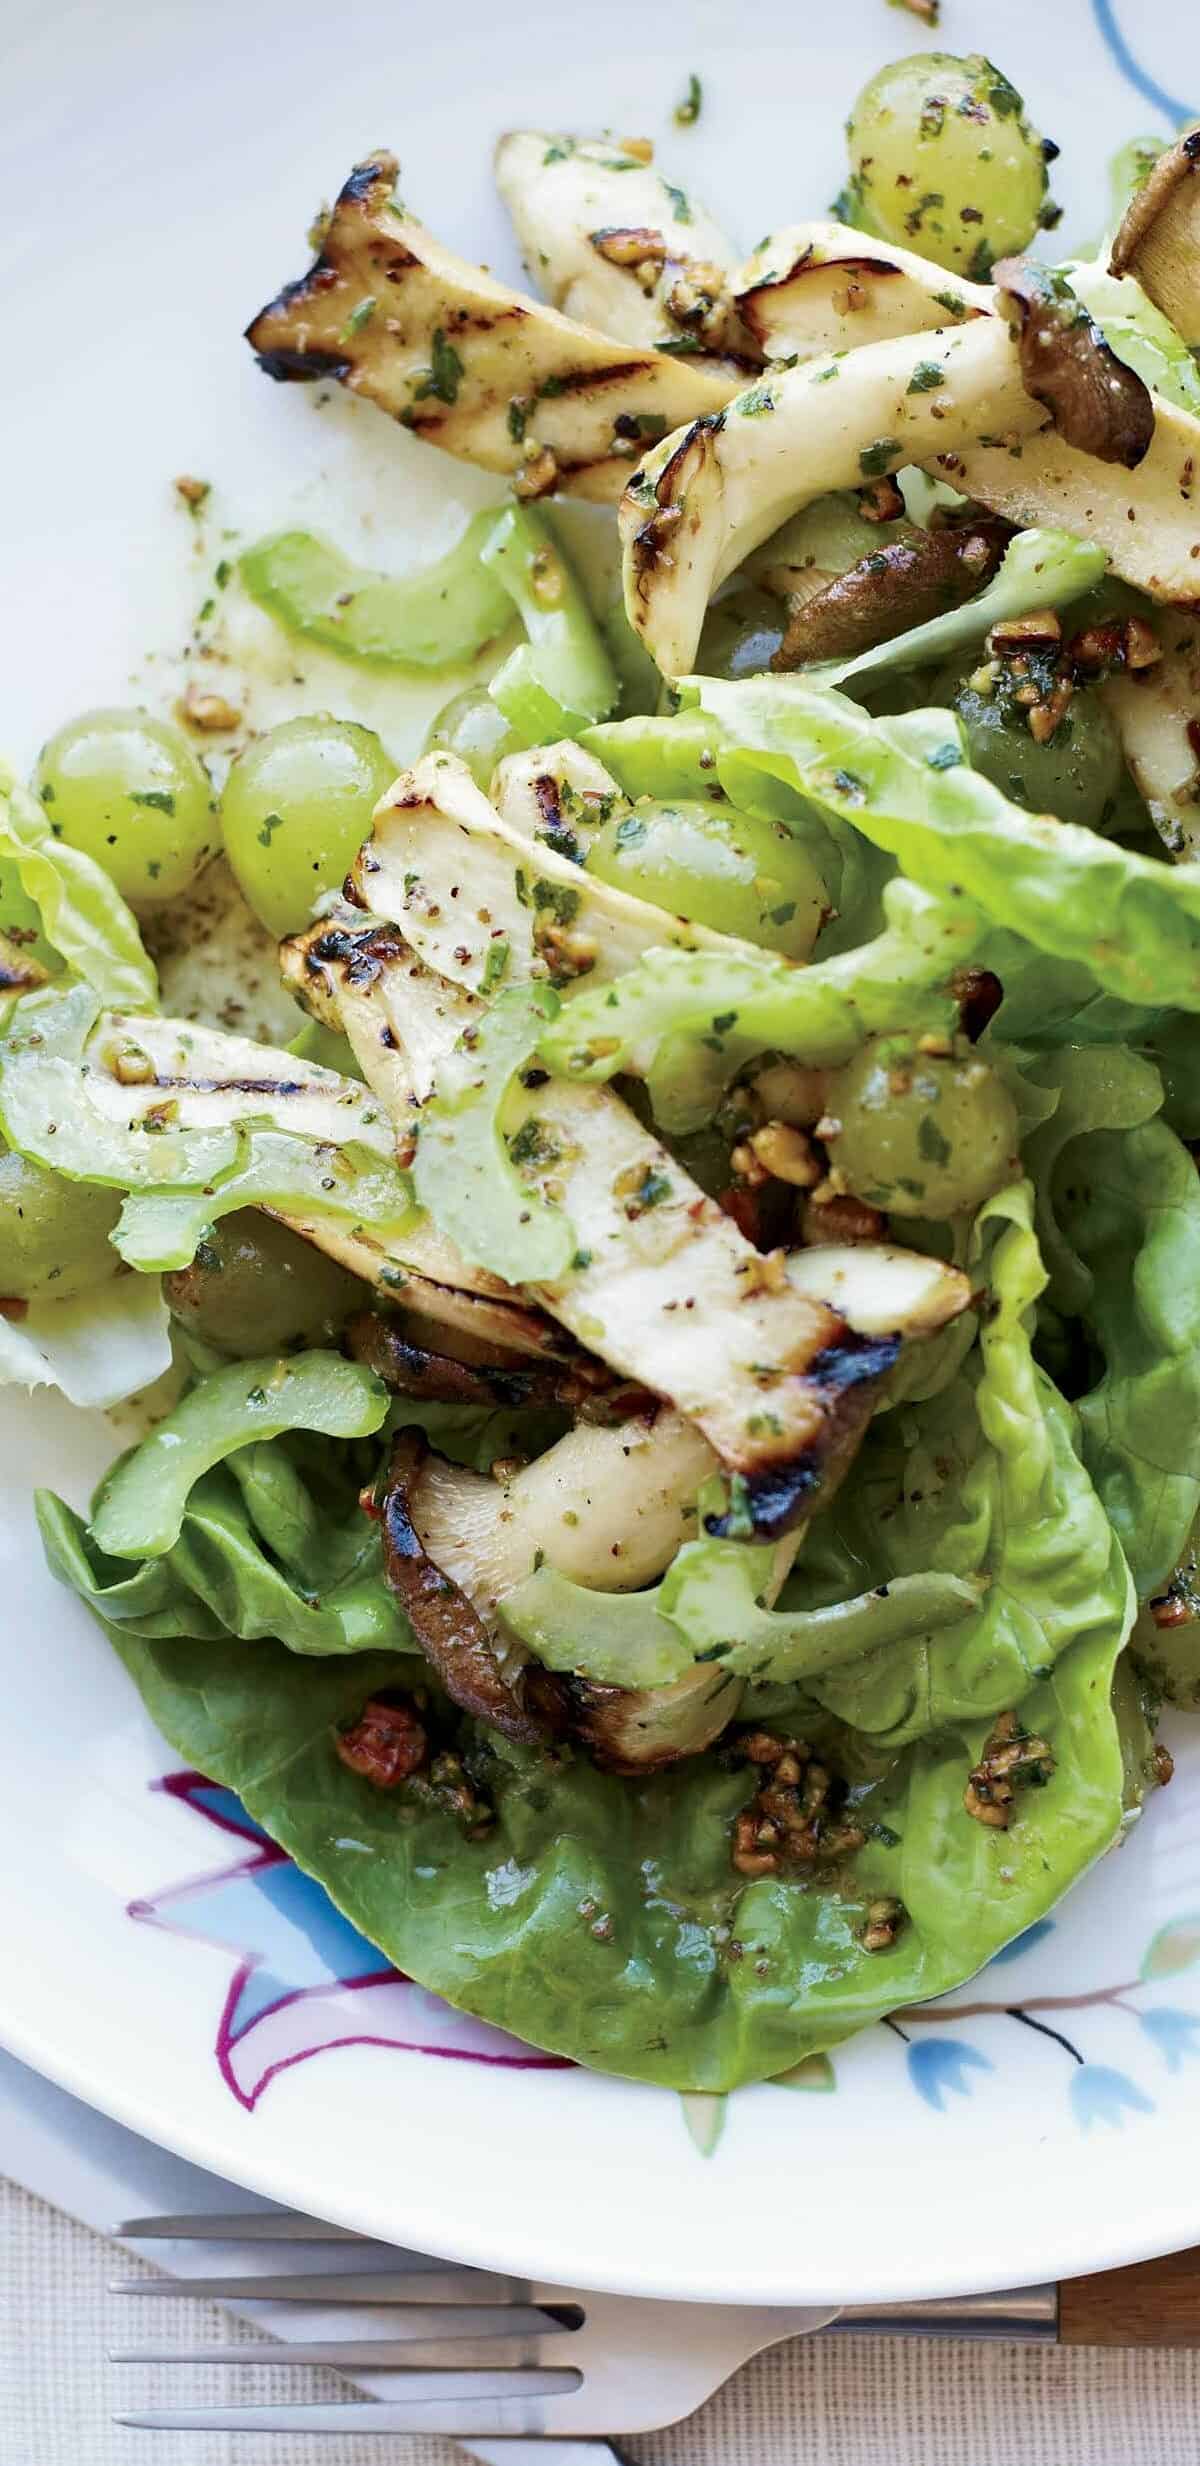  Don't knock it 'til you try it - Sauteed Oyster Mushroom Caesar Salad is a game changer